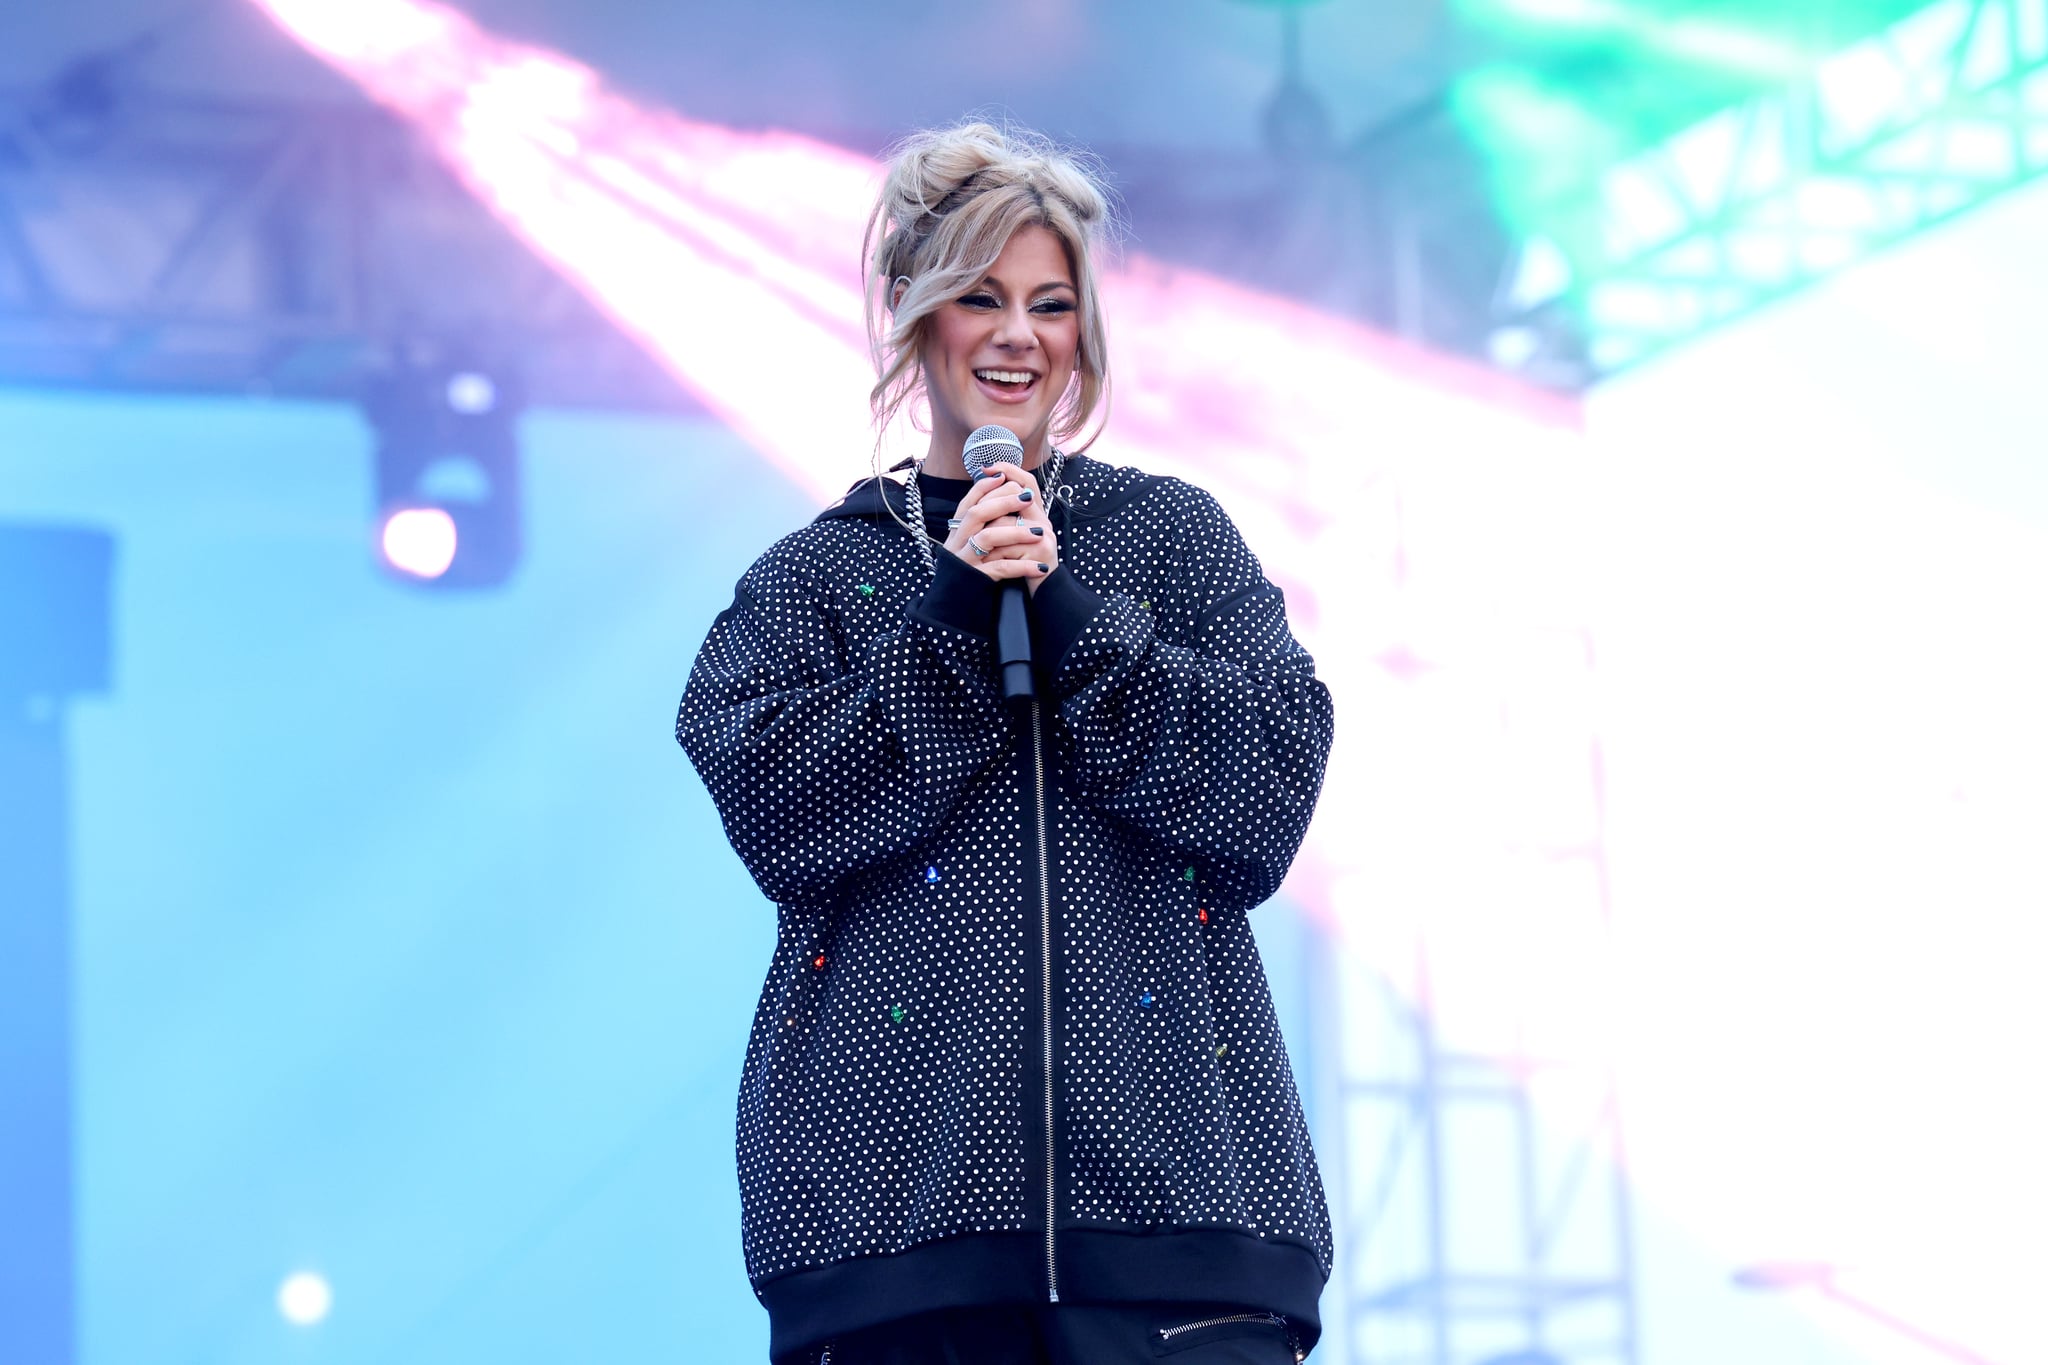  Jax performs onstage during the KIIS Jingle Ball Village at The Kia Forum on December 02, 2022 in Inglewood, California. (Photo by Jesse Grant/Getty Images for iHeartRadio)